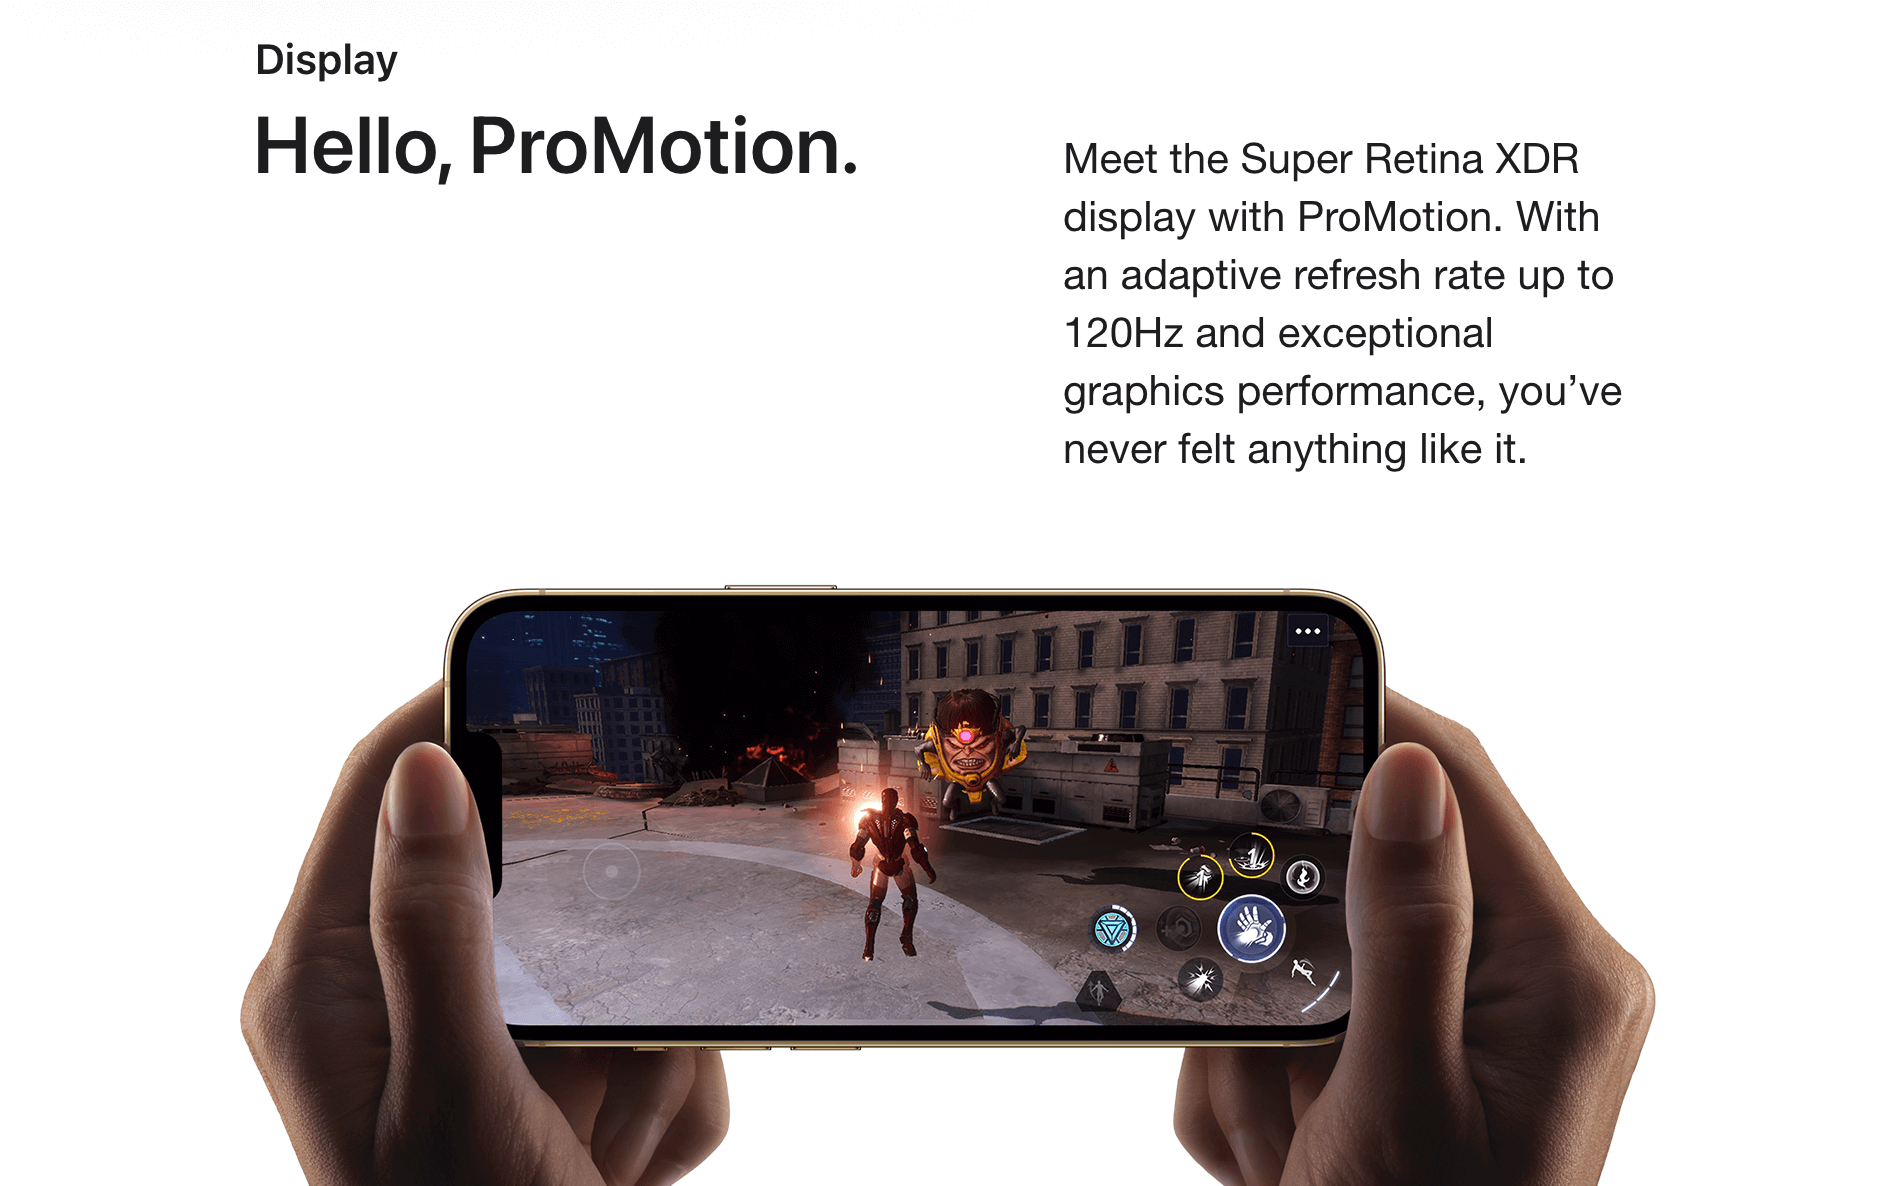 iPhone 13 Pro. Oh. So. Pro.